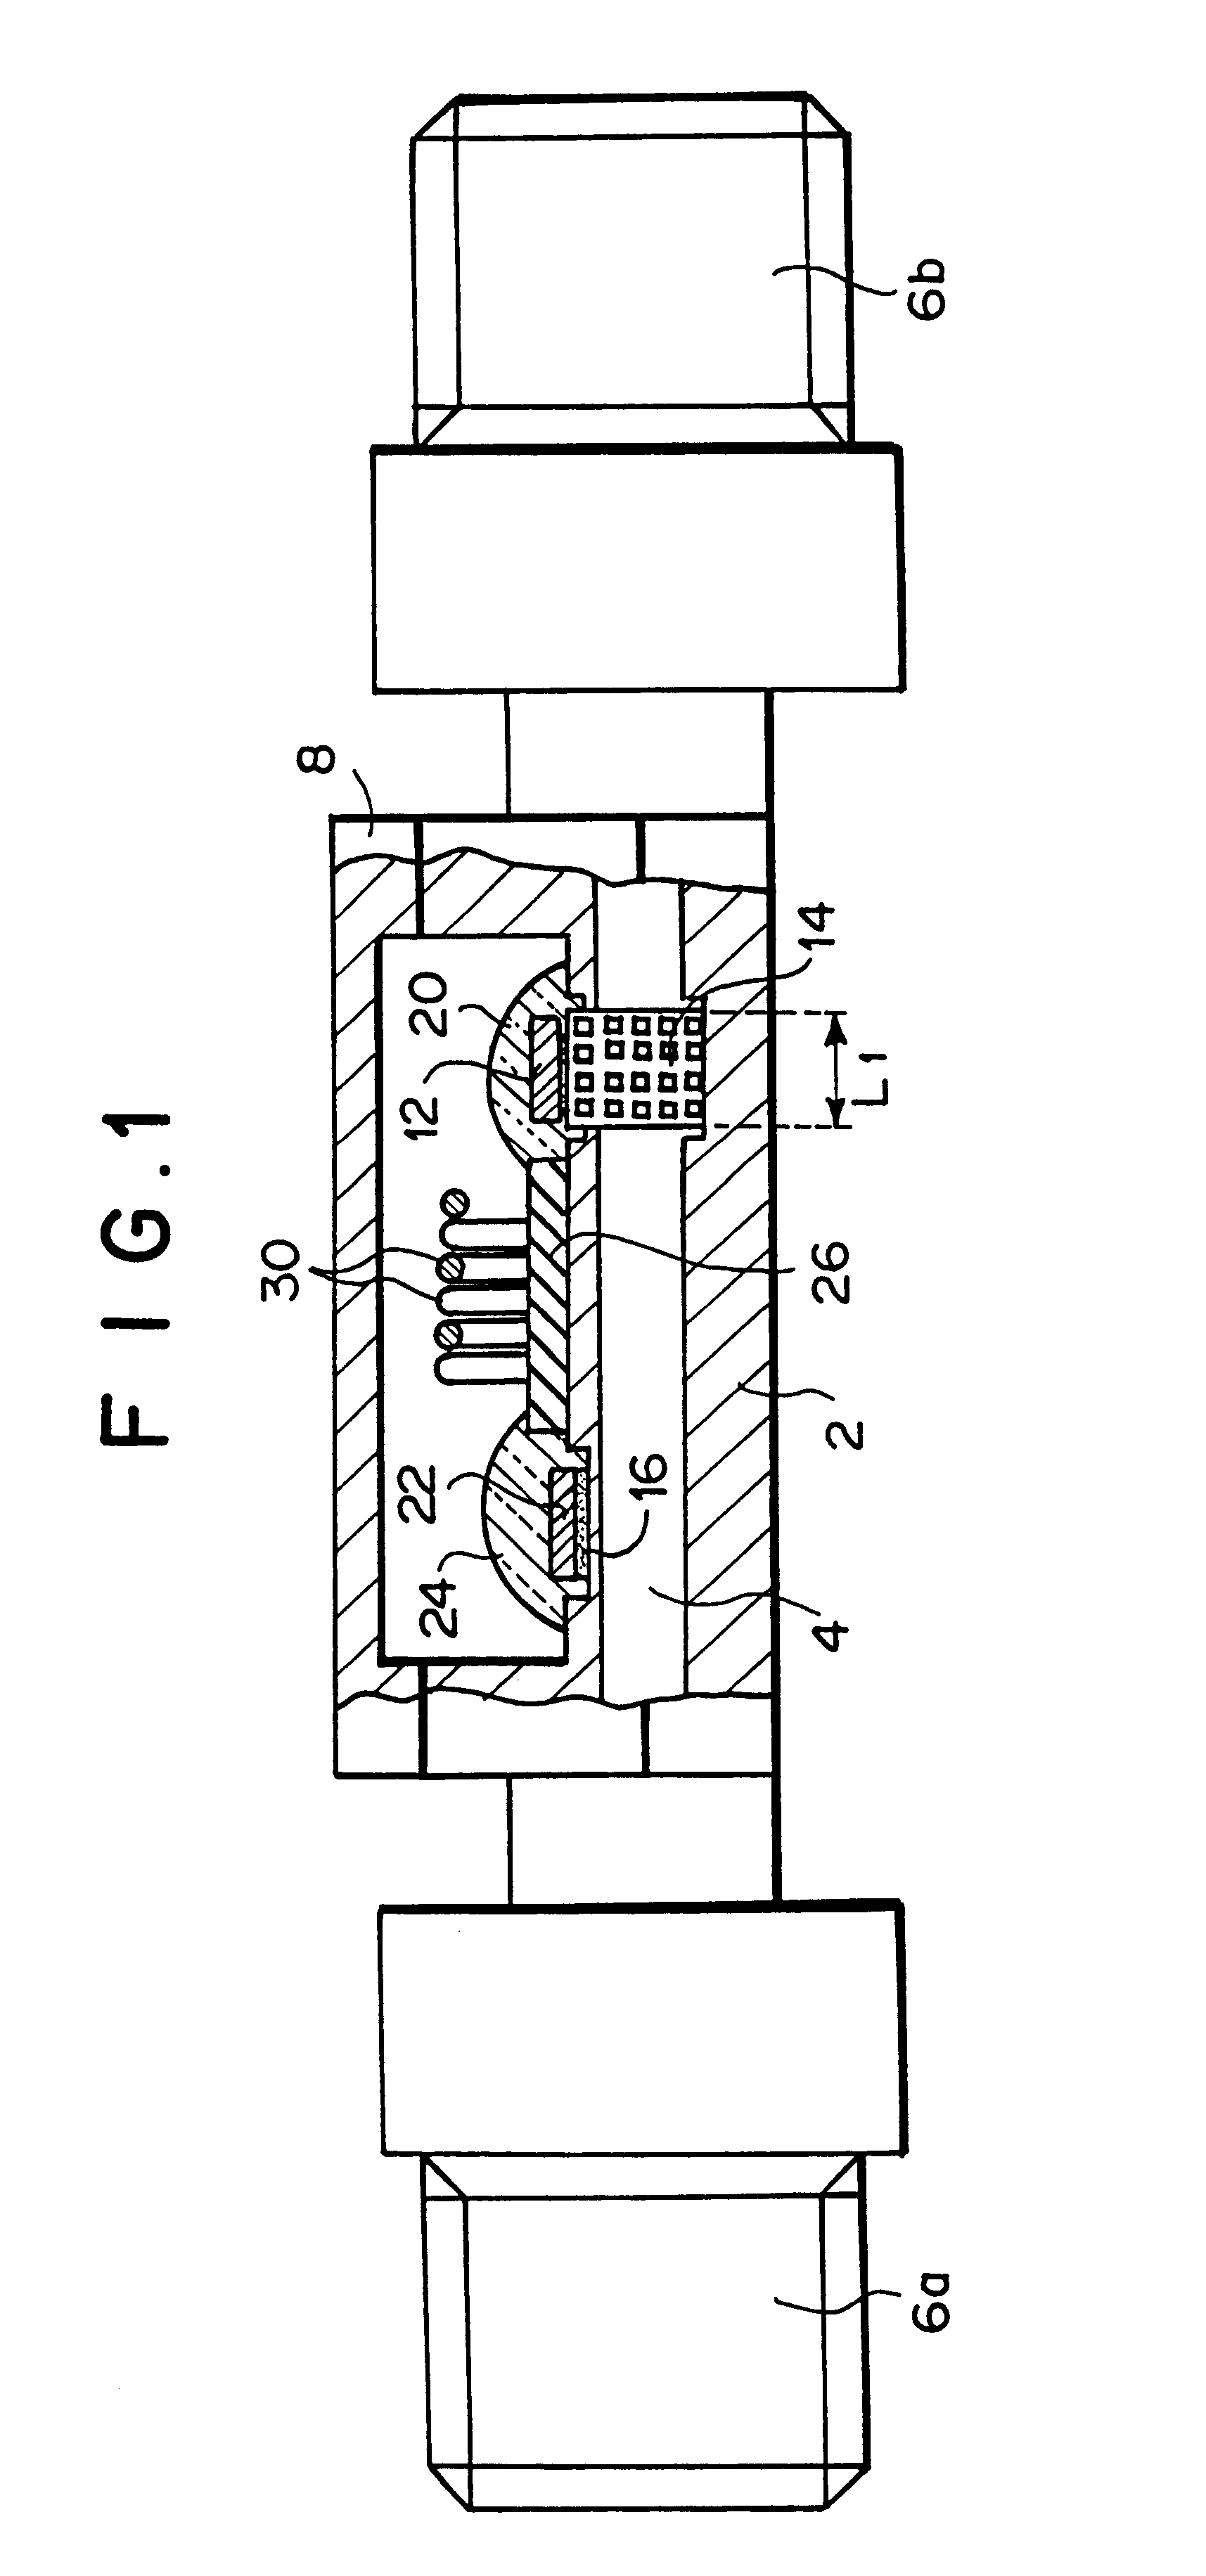 Flow rate sensor, flow meter, and discharge rate control apparatus for liquid discharge machines